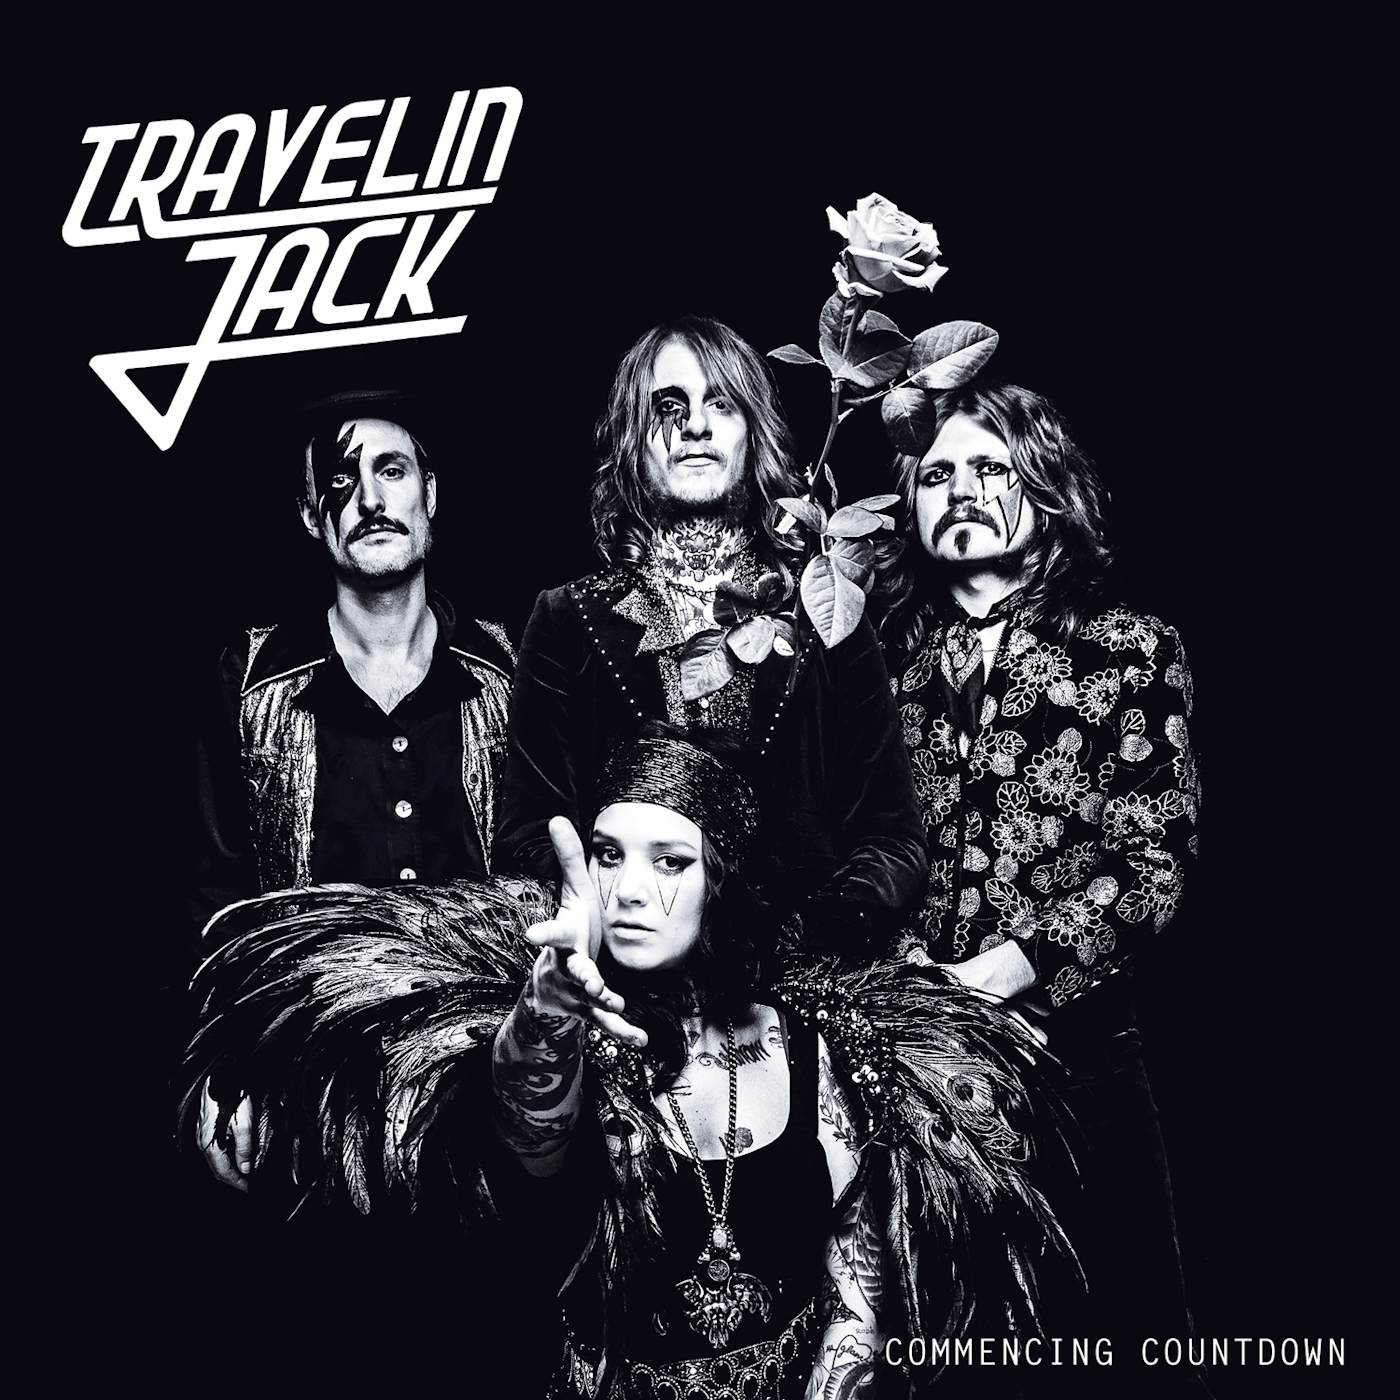 Travelin Jack Commencing Countdown Vinyl Record